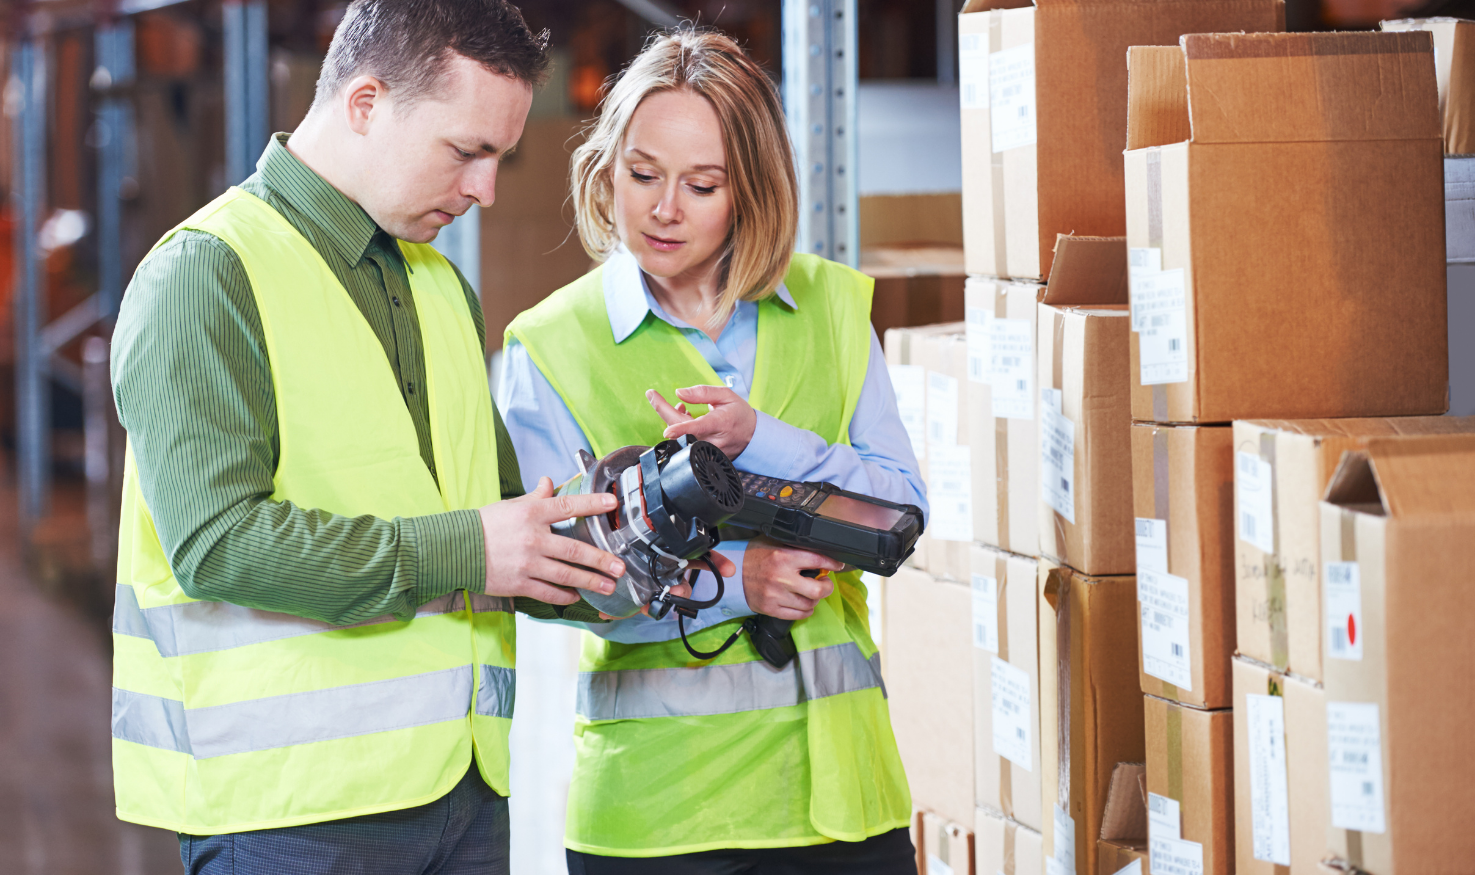 Inventory management had become easier with rugged devices